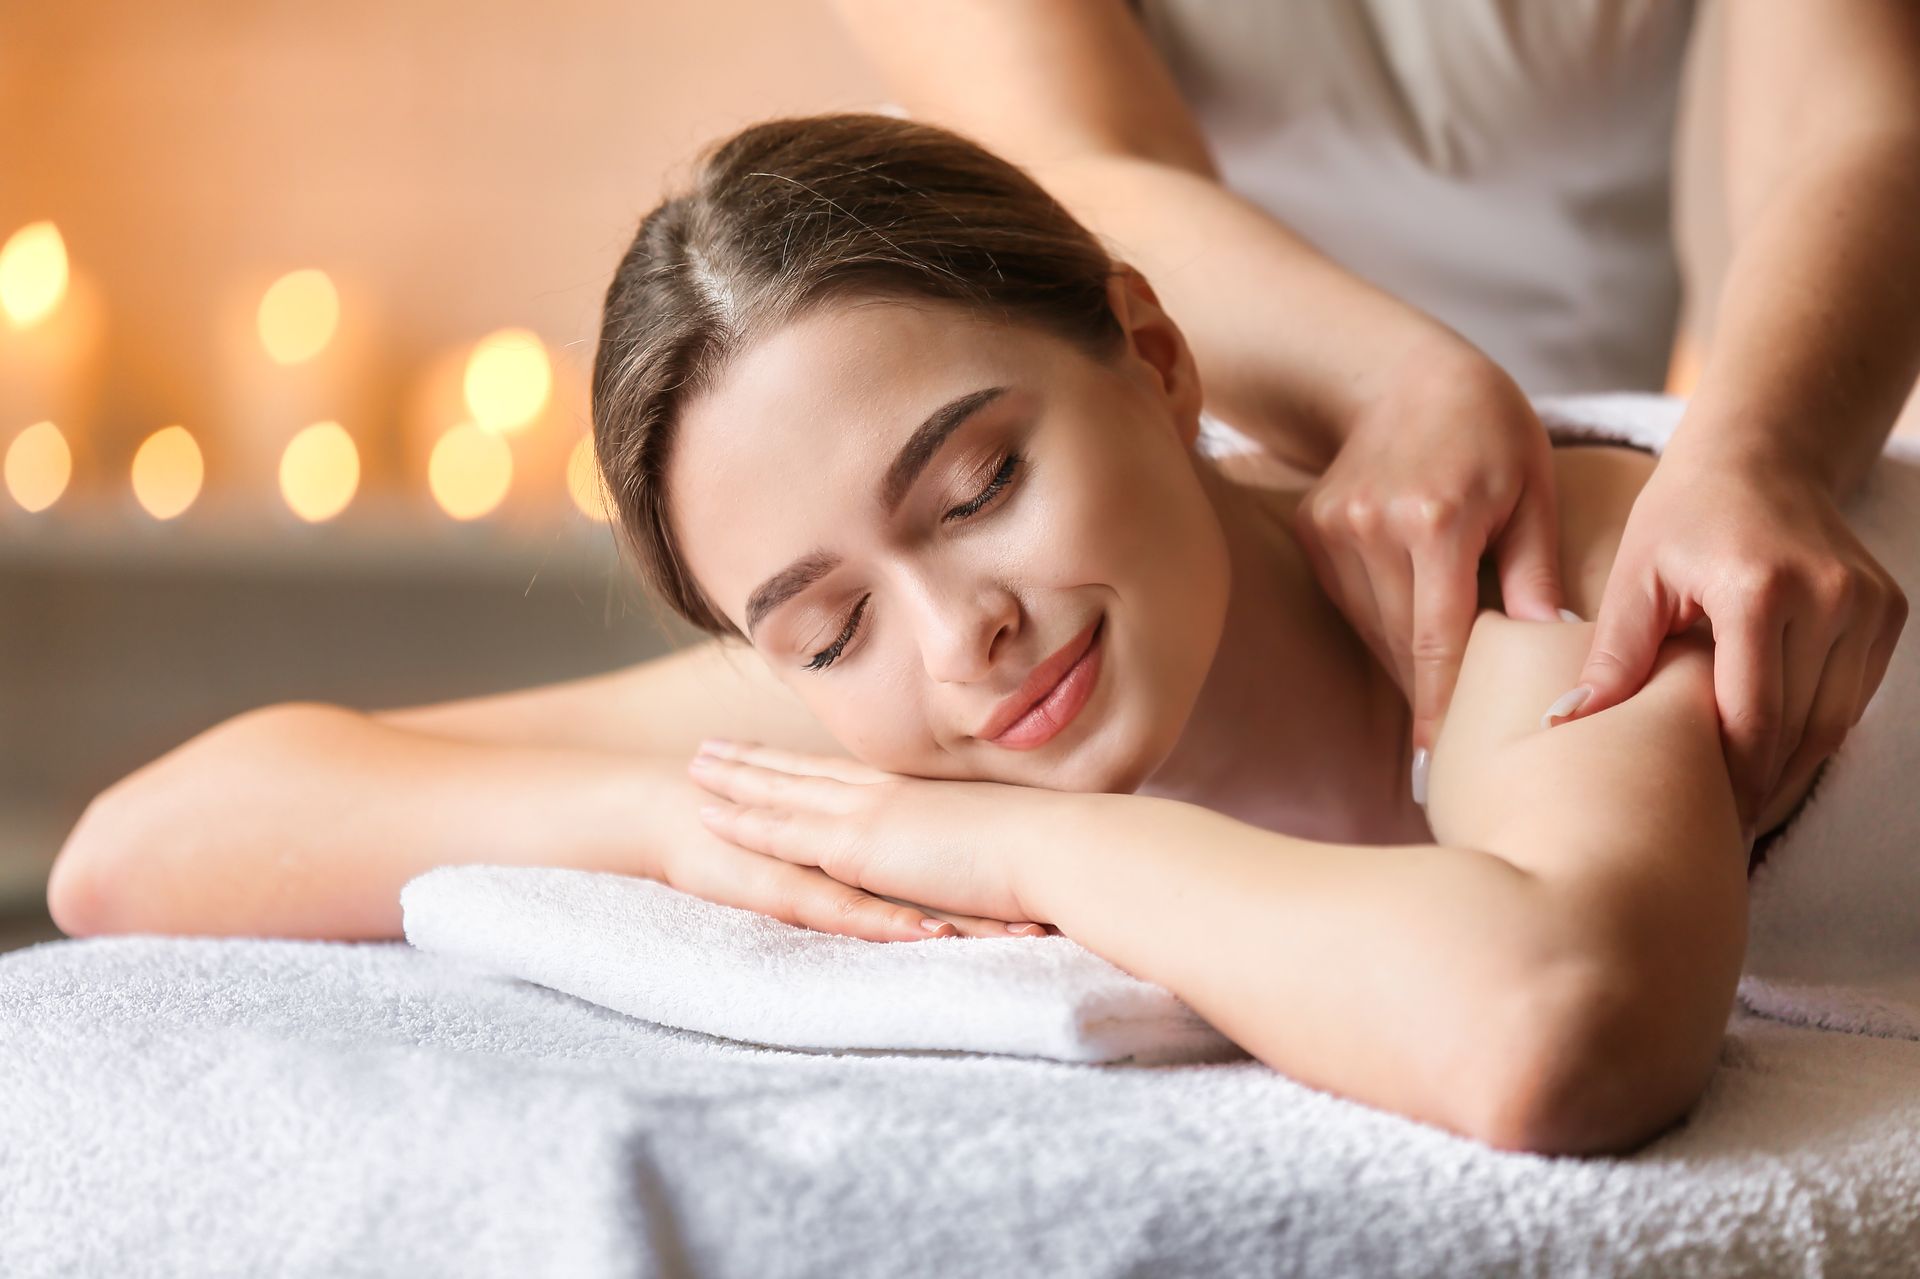 a woman is smiling while getting a massage at a spa